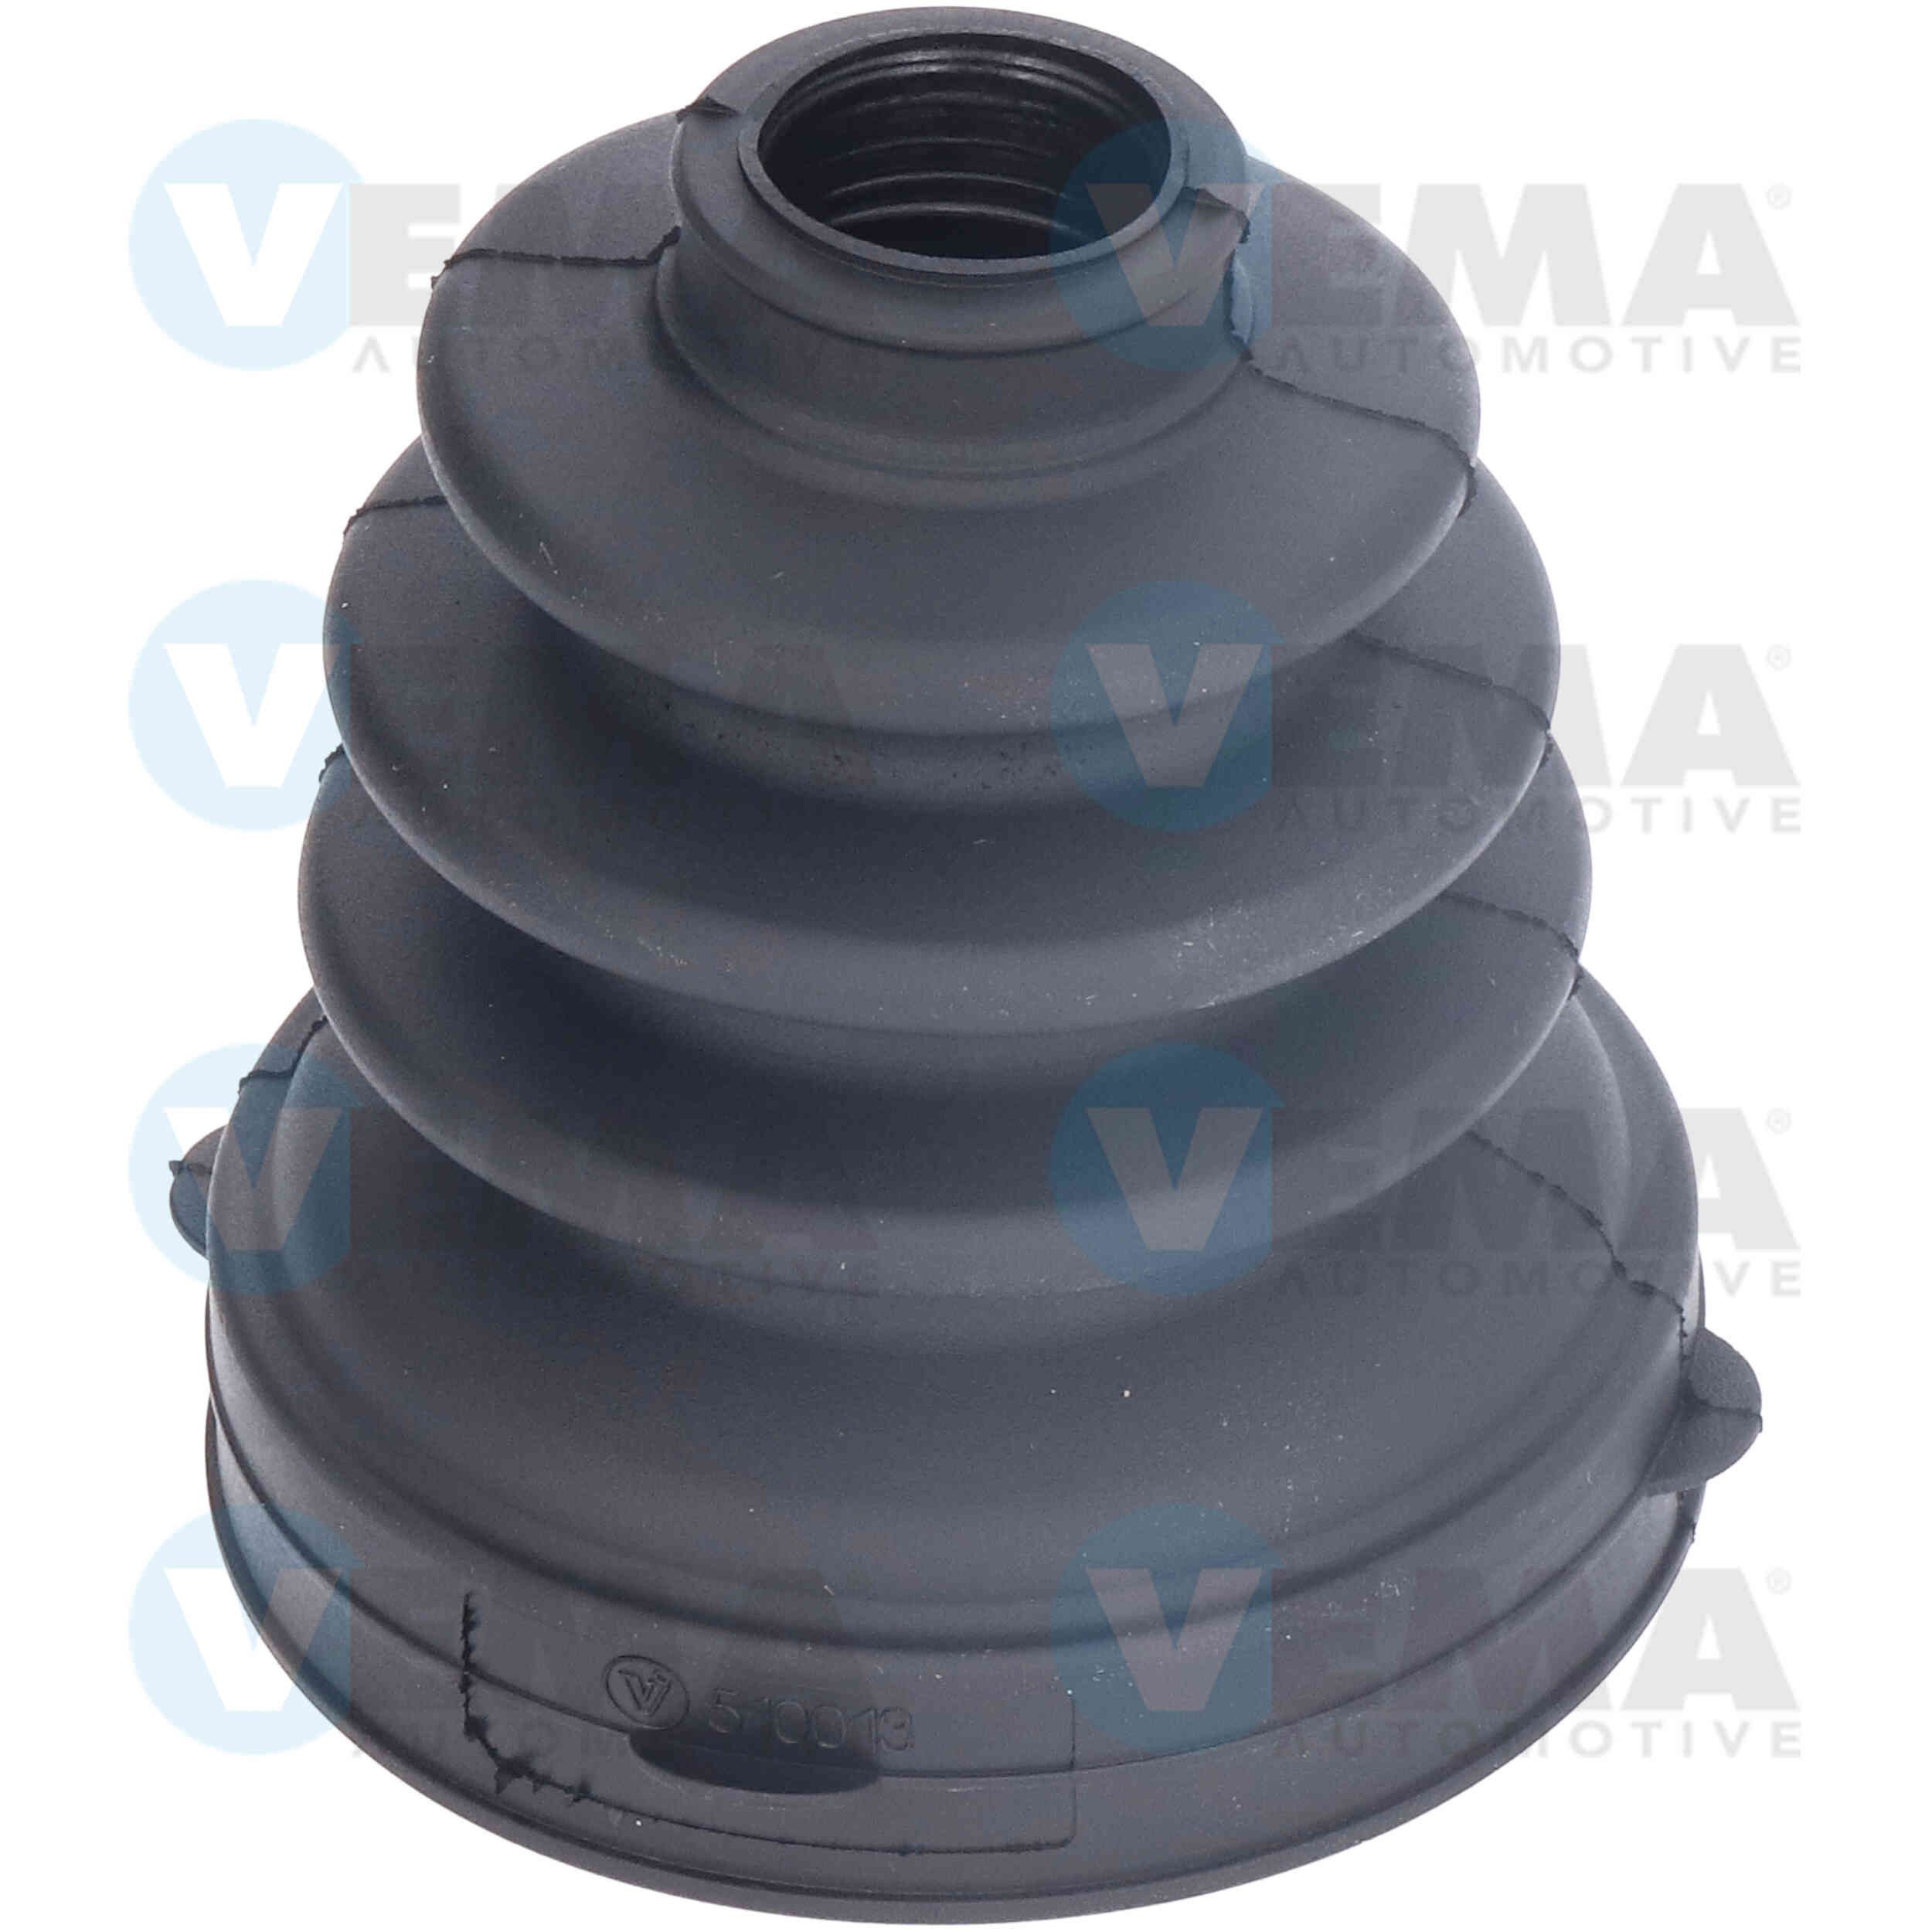 VEMA Front axle both sides, 88mm, Rubber Height: 88mm, Rubber Bellow, driveshaft 510013 buy